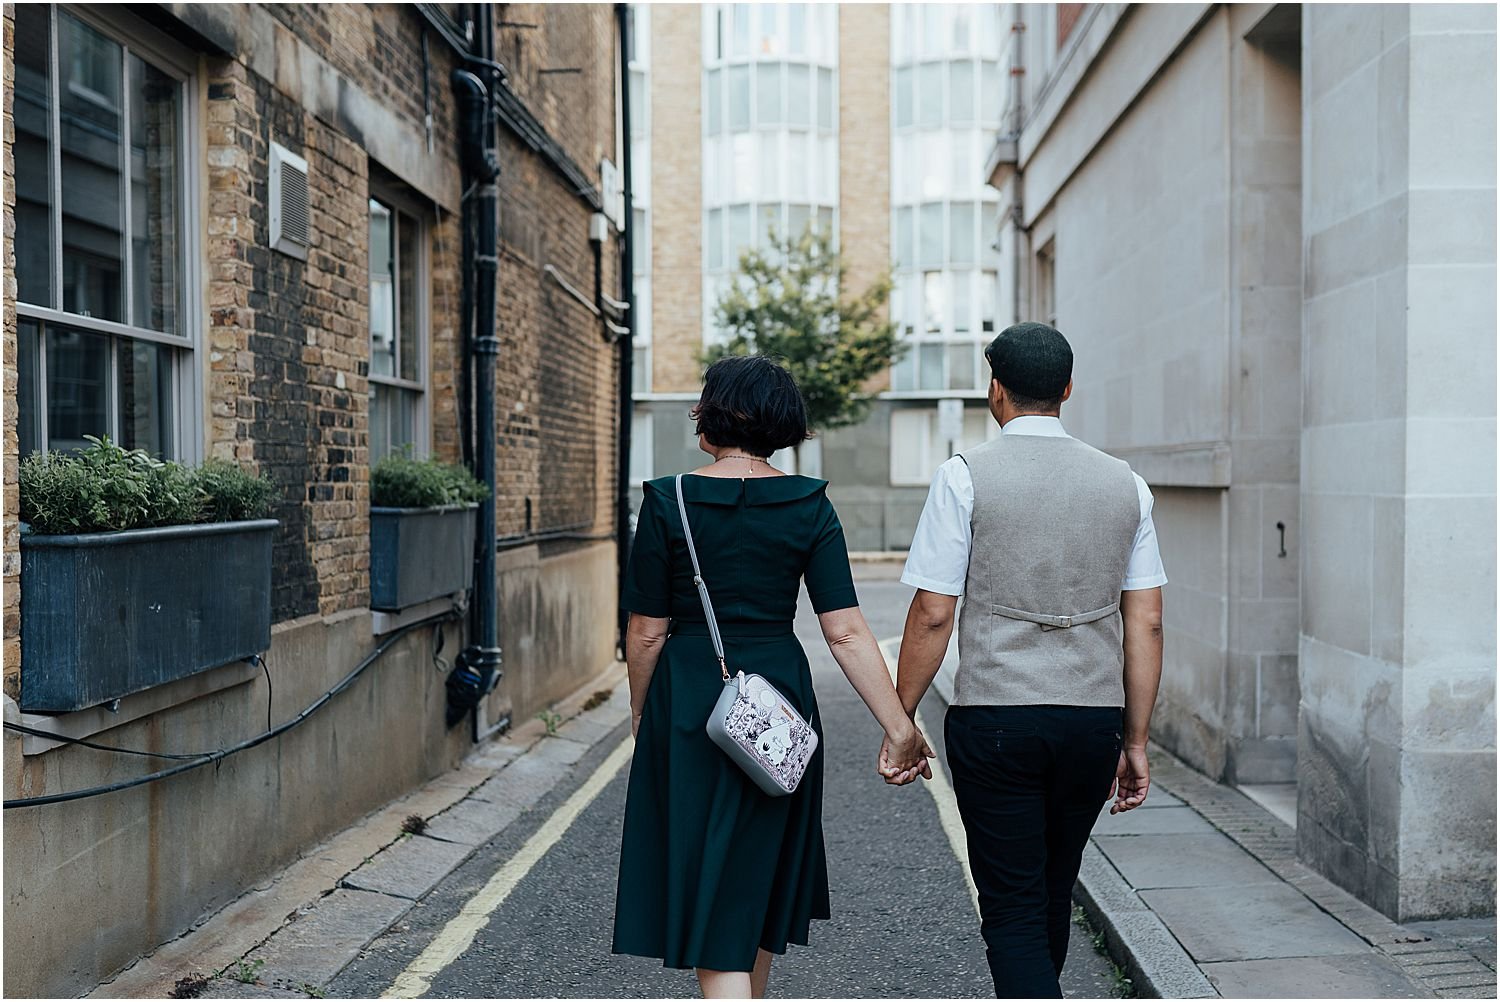 Couple on holiday in London 